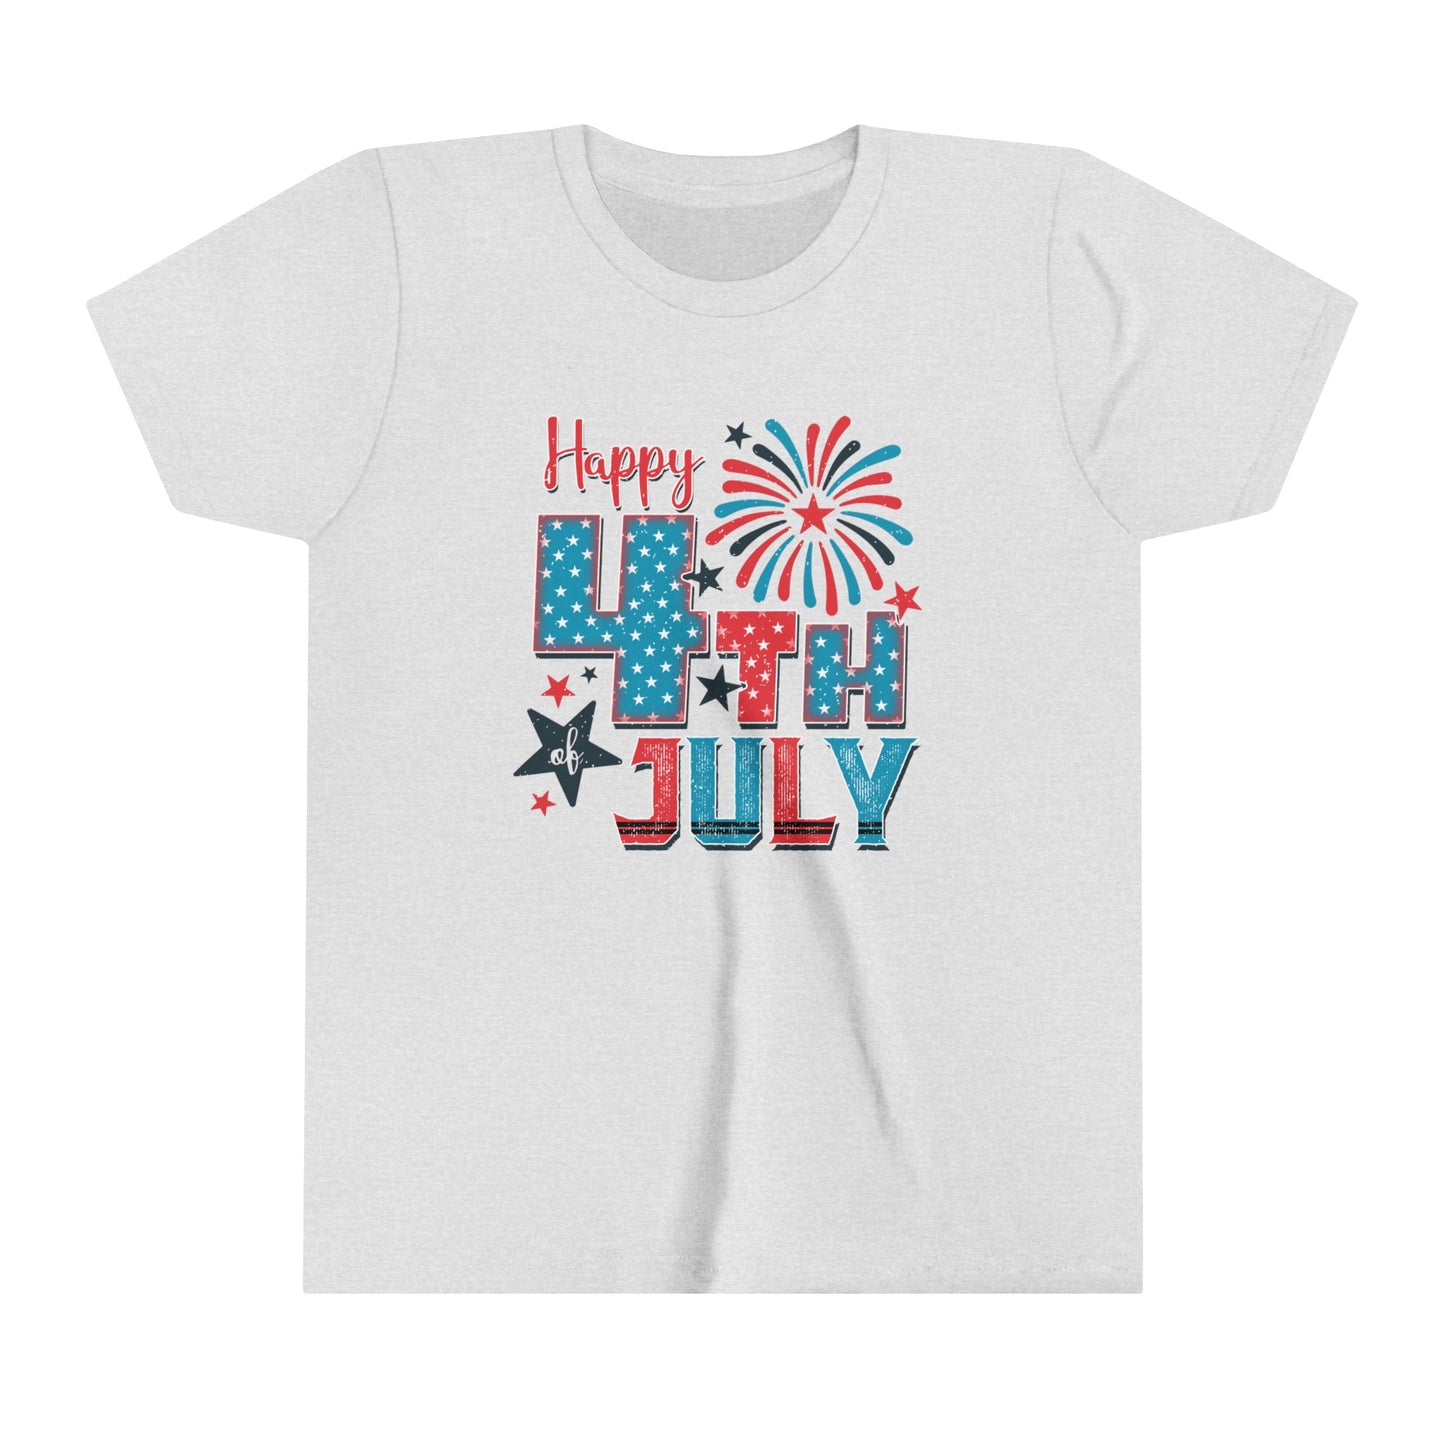 Happy 4th of July USA Youth Shirt